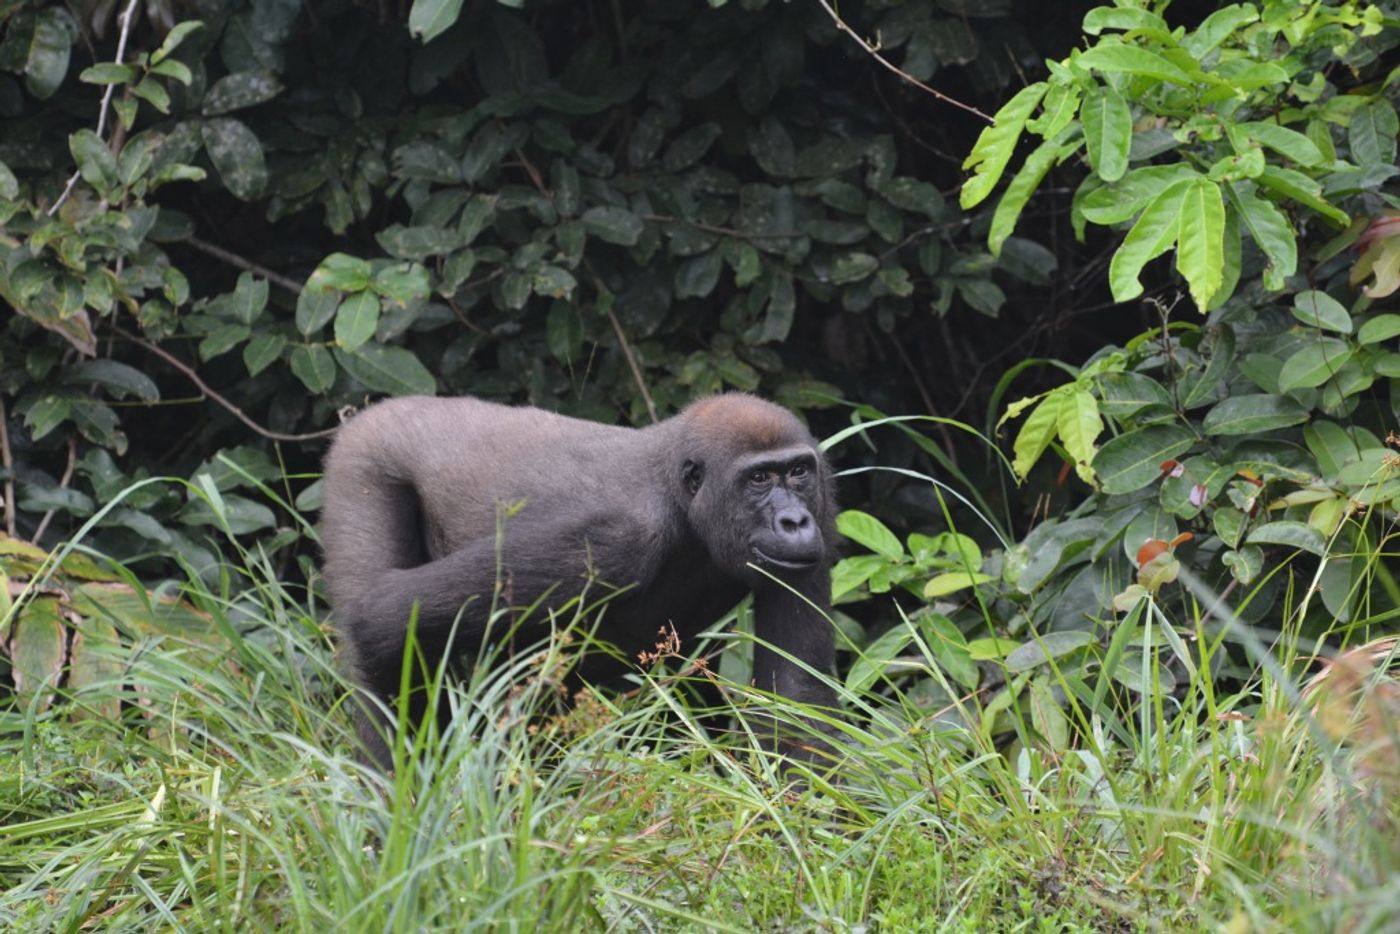 Sosa, a 12-year-old blackback gorilla, has been shot and killed in protected parts of Central Africa by poachers.